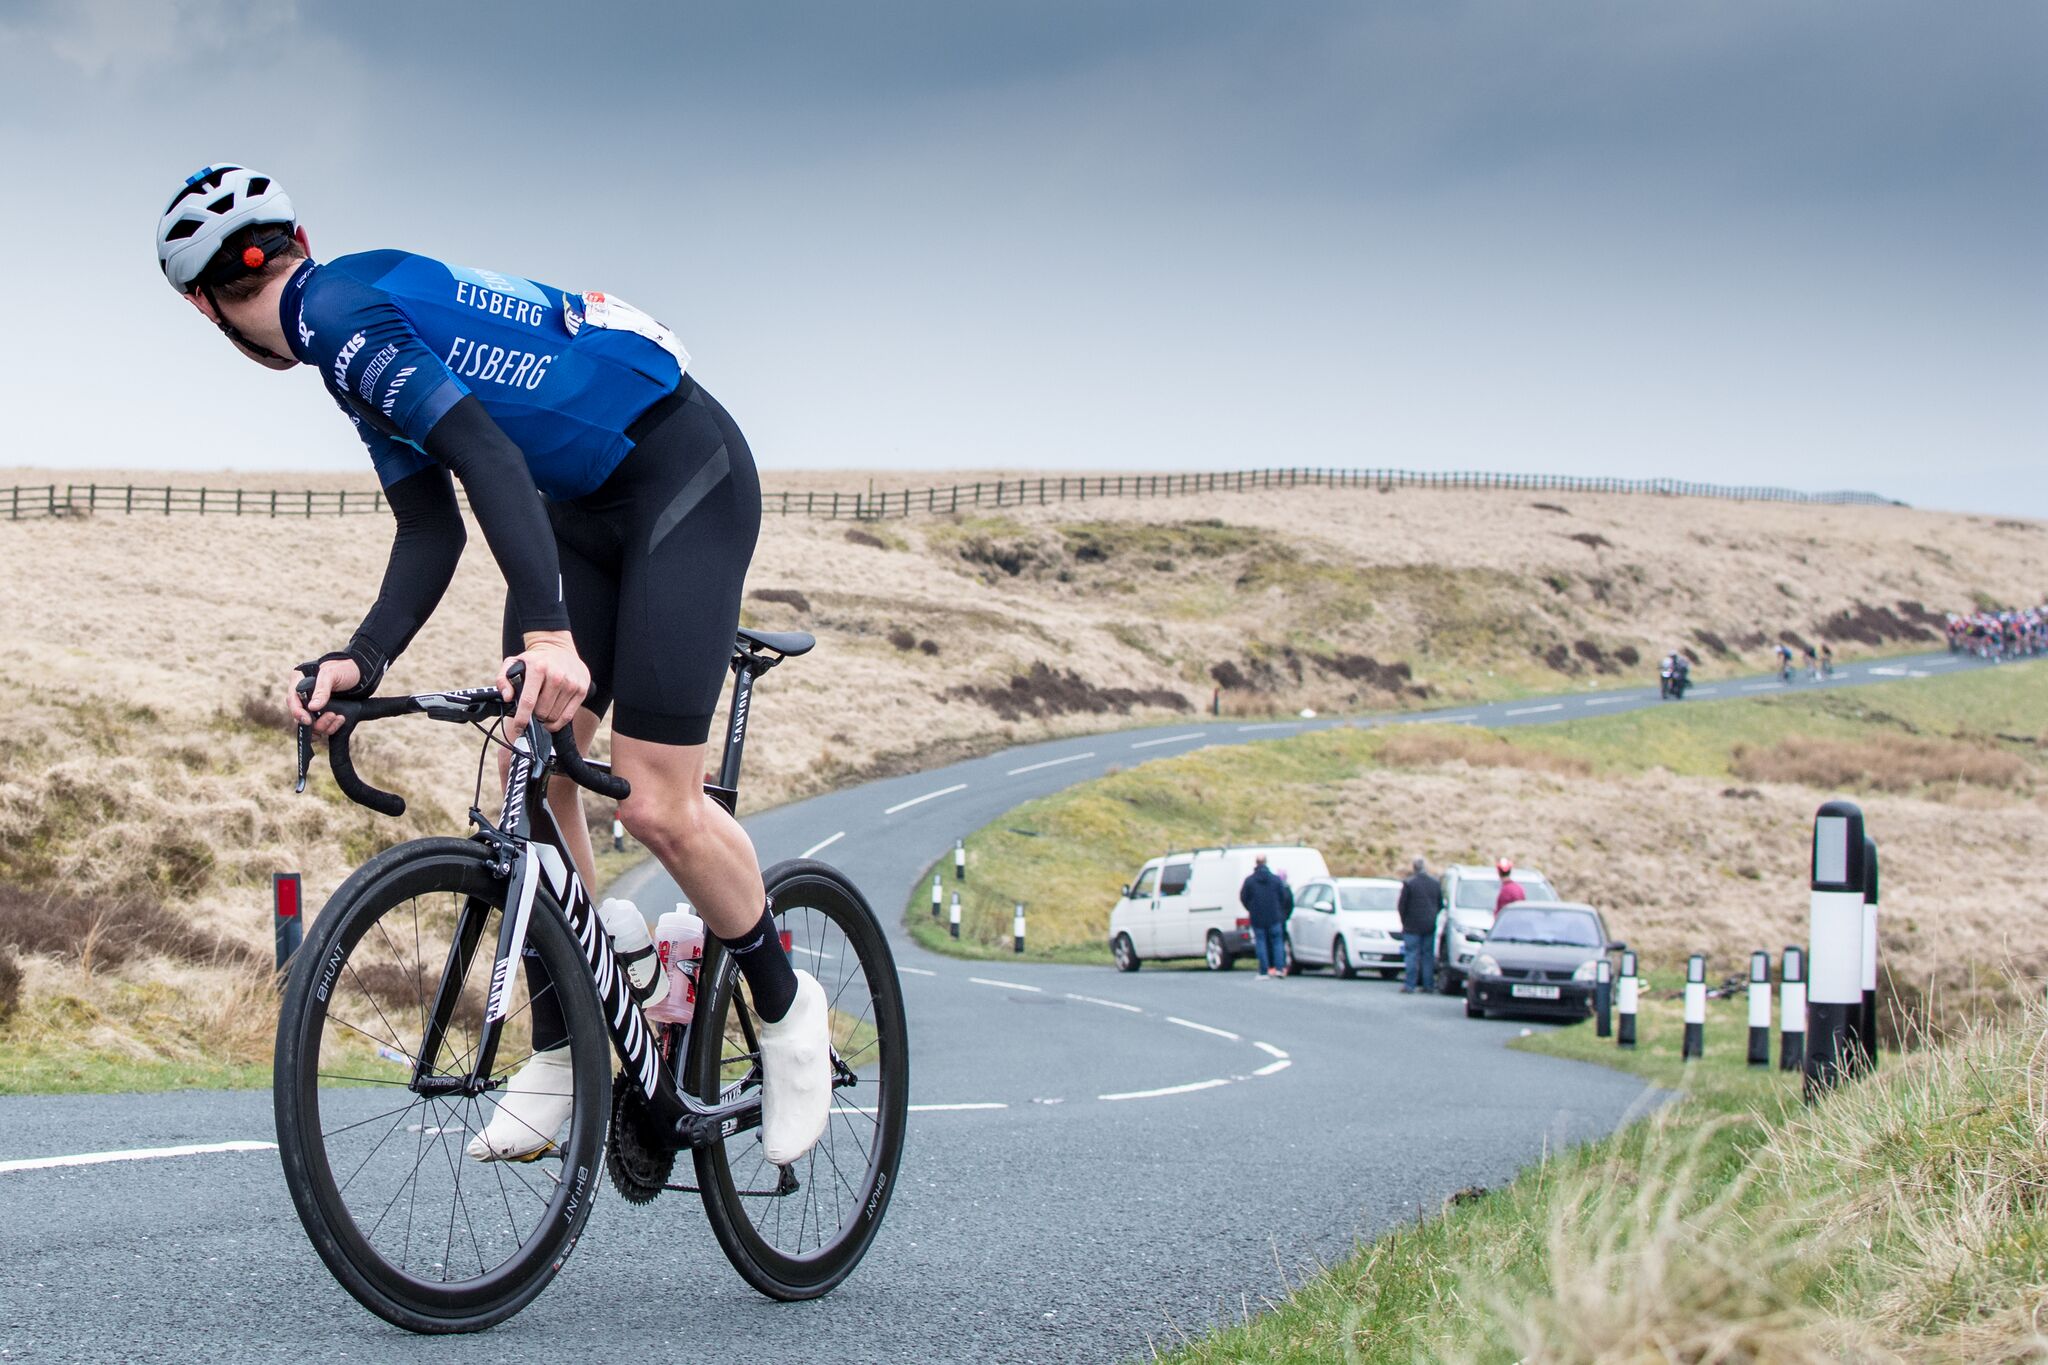 Canyon Eisberg at the Tour de Yorkshire continental bicycle racing 2